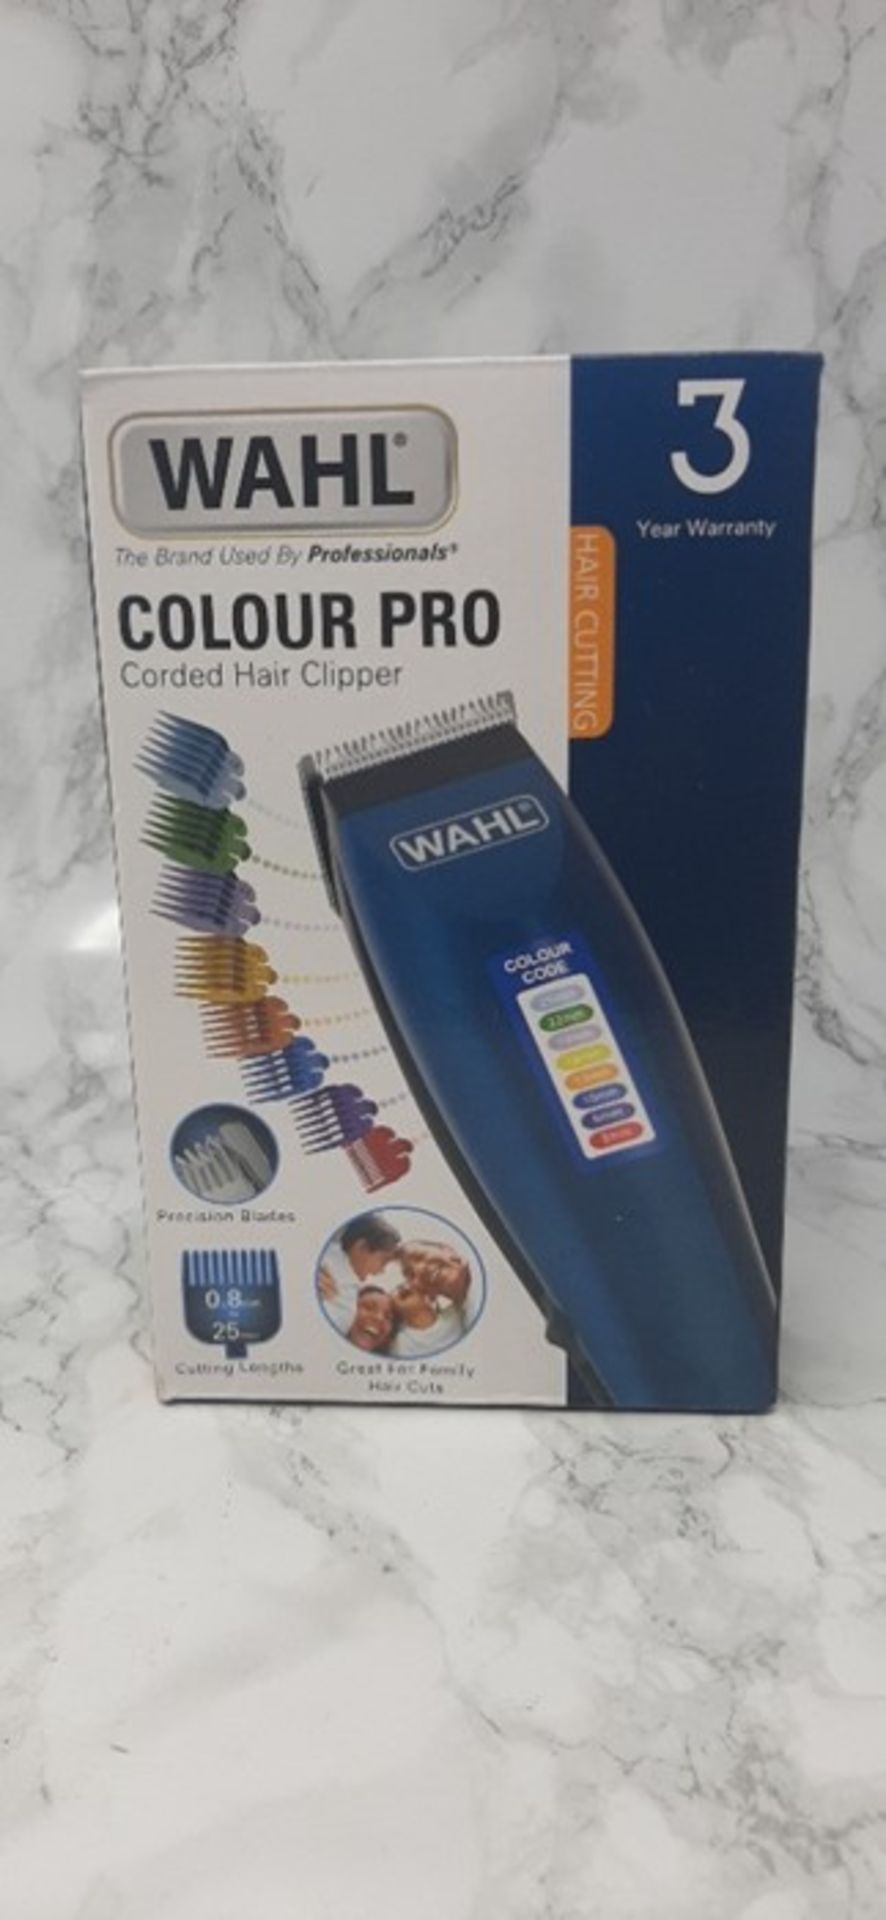 WAHL Hair Clippers for Men, Colour Pro Corded Clipper, Head Shaver, Men's Hair Clipper - Image 2 of 3